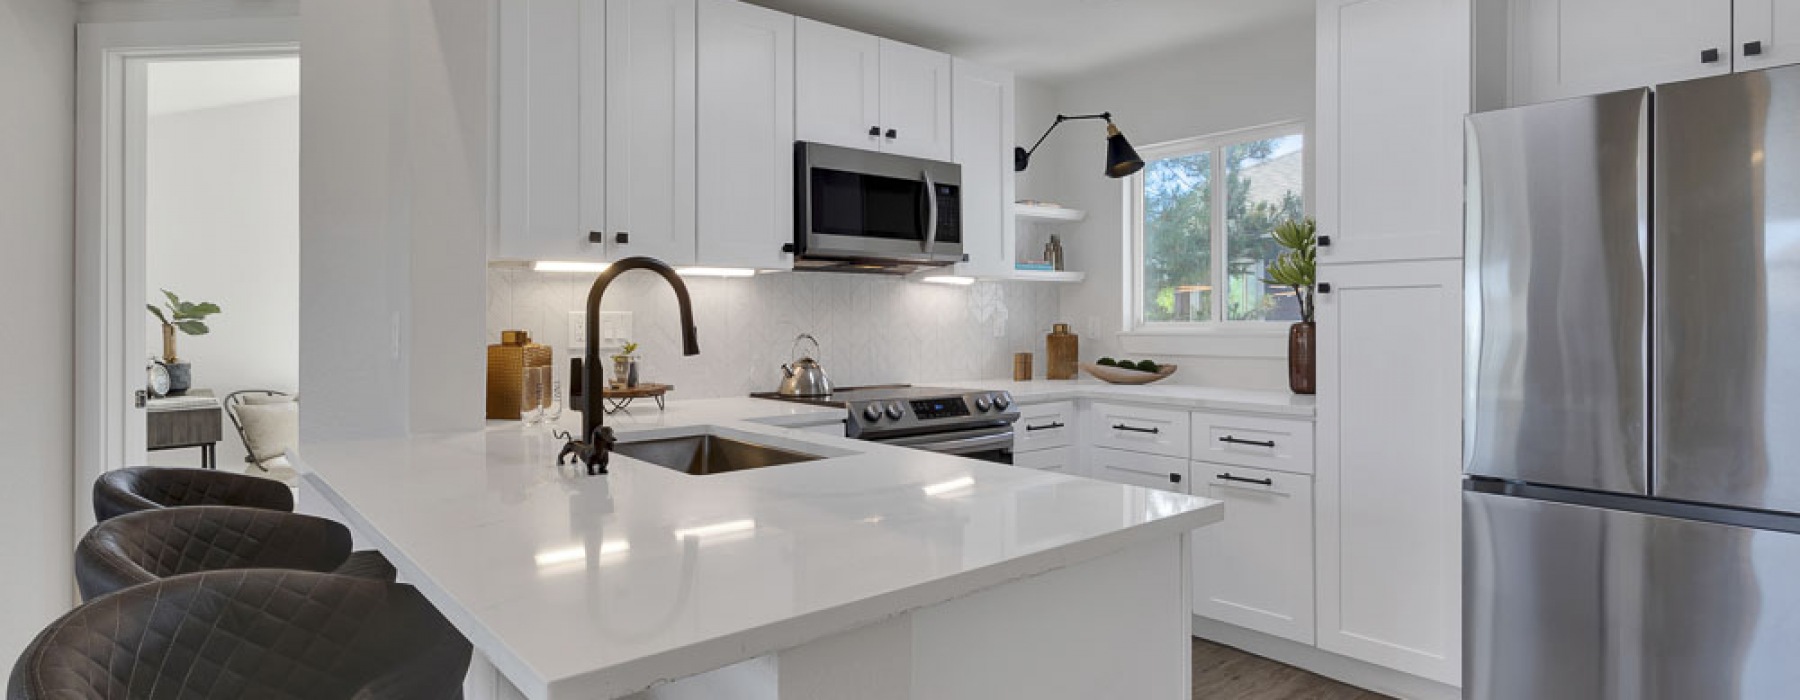 Kitchen with white counters and cabinets, stainless steel appliances